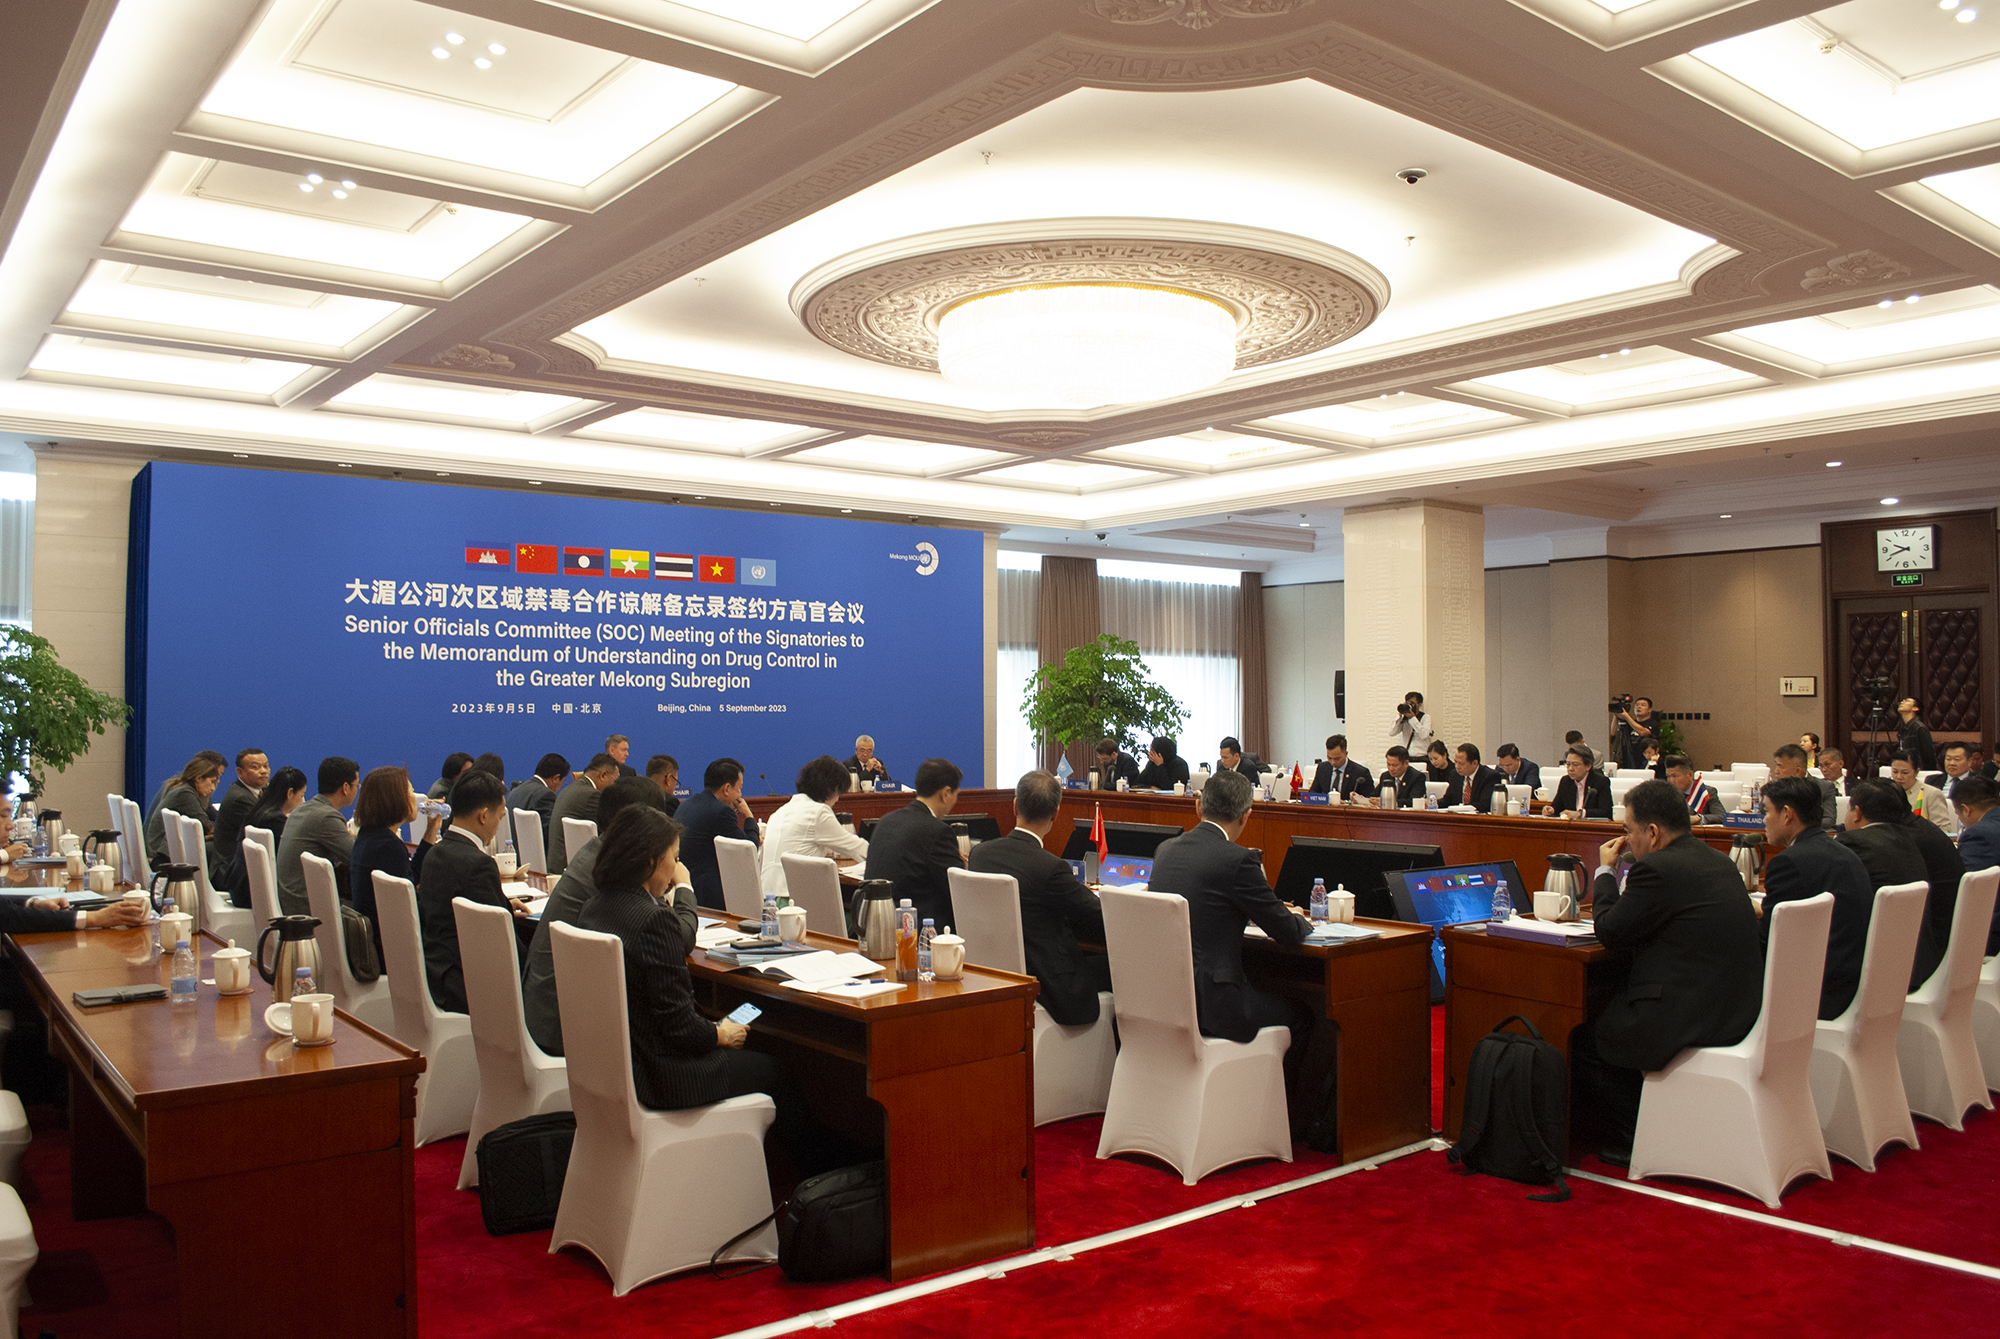 The opening ceremony of the Senior Officials Committee Meeting in Beijing, China, gathering the six signatory States to the Mekong MOU and UNODC